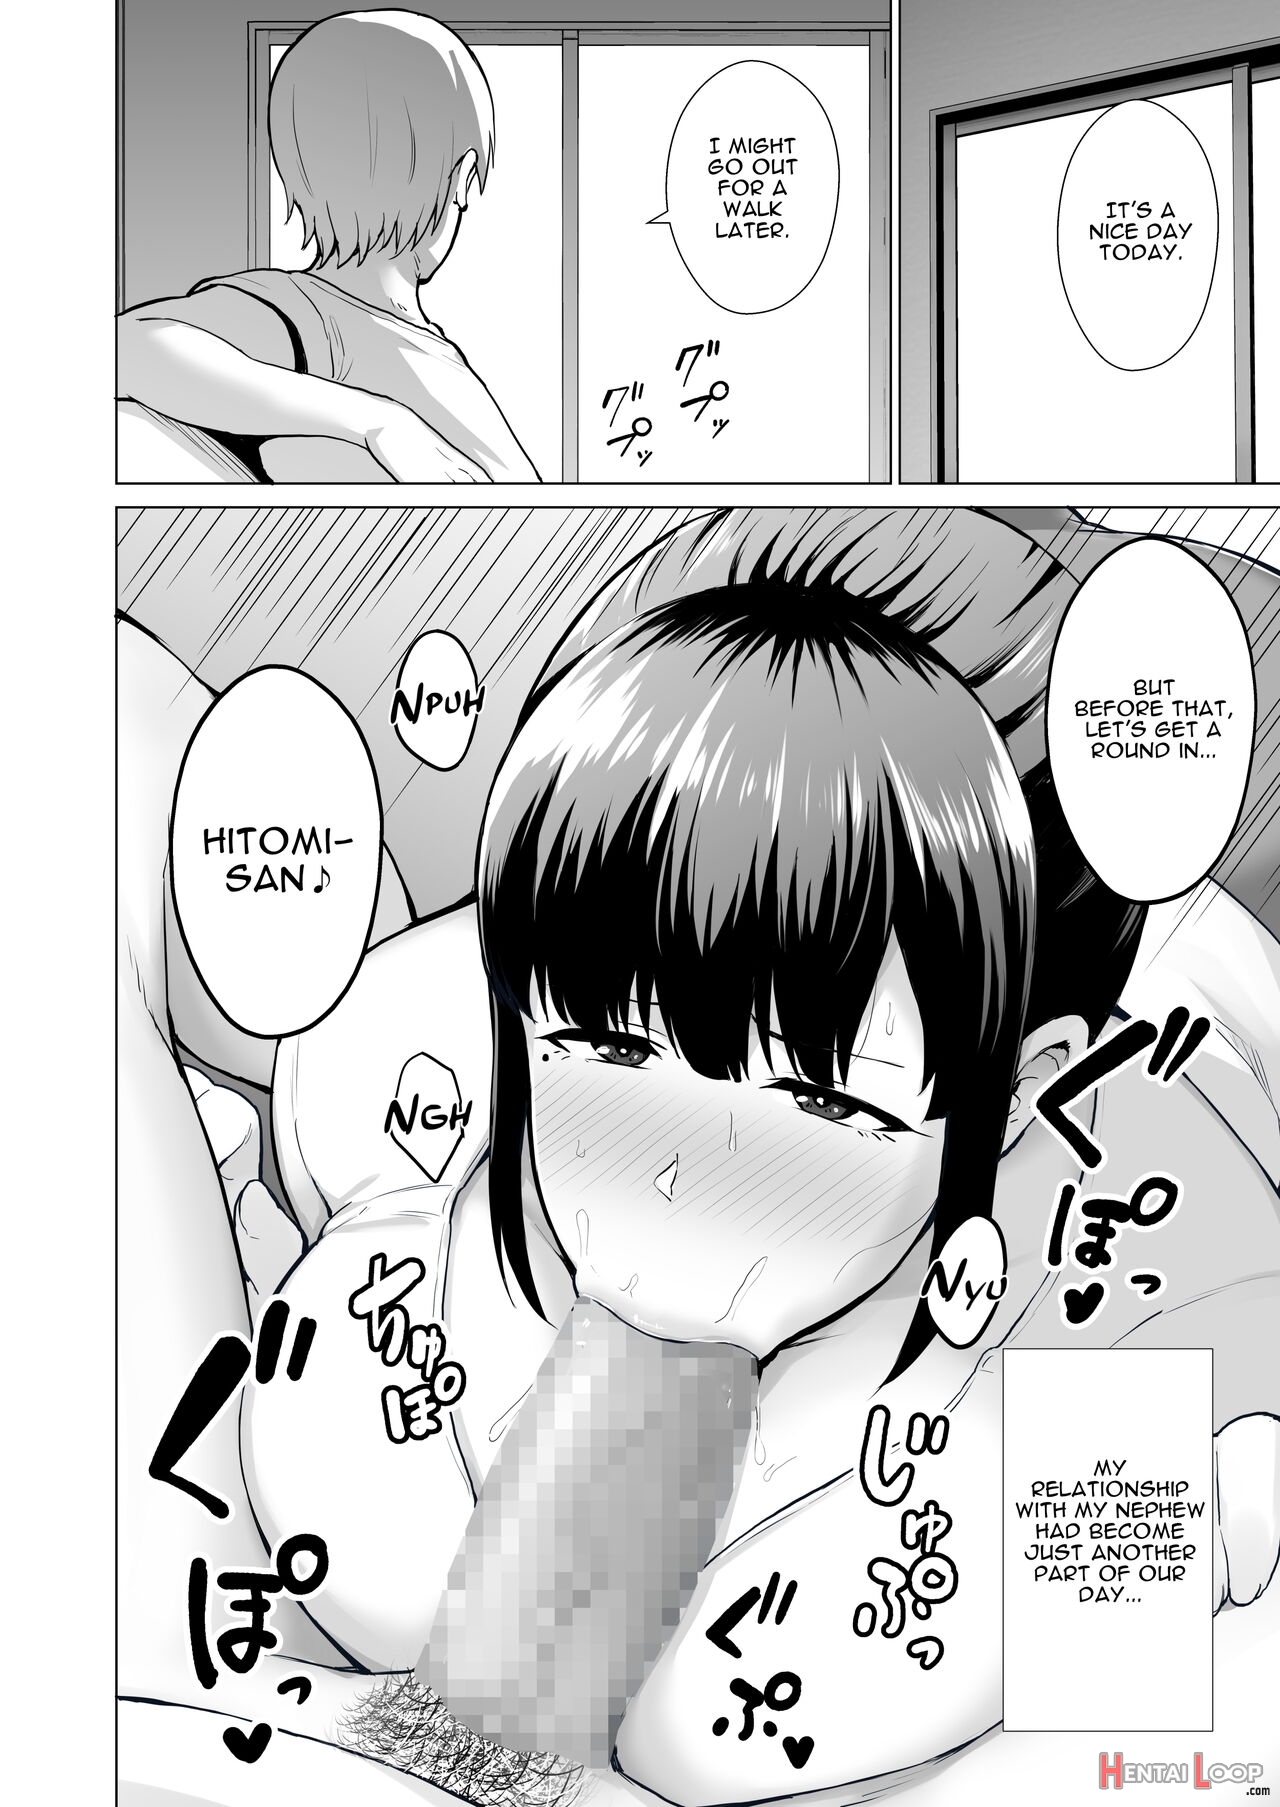 Housewife Ntr Stealing Hitomi - A Prim And Proper Housewife With Big Tits page 18